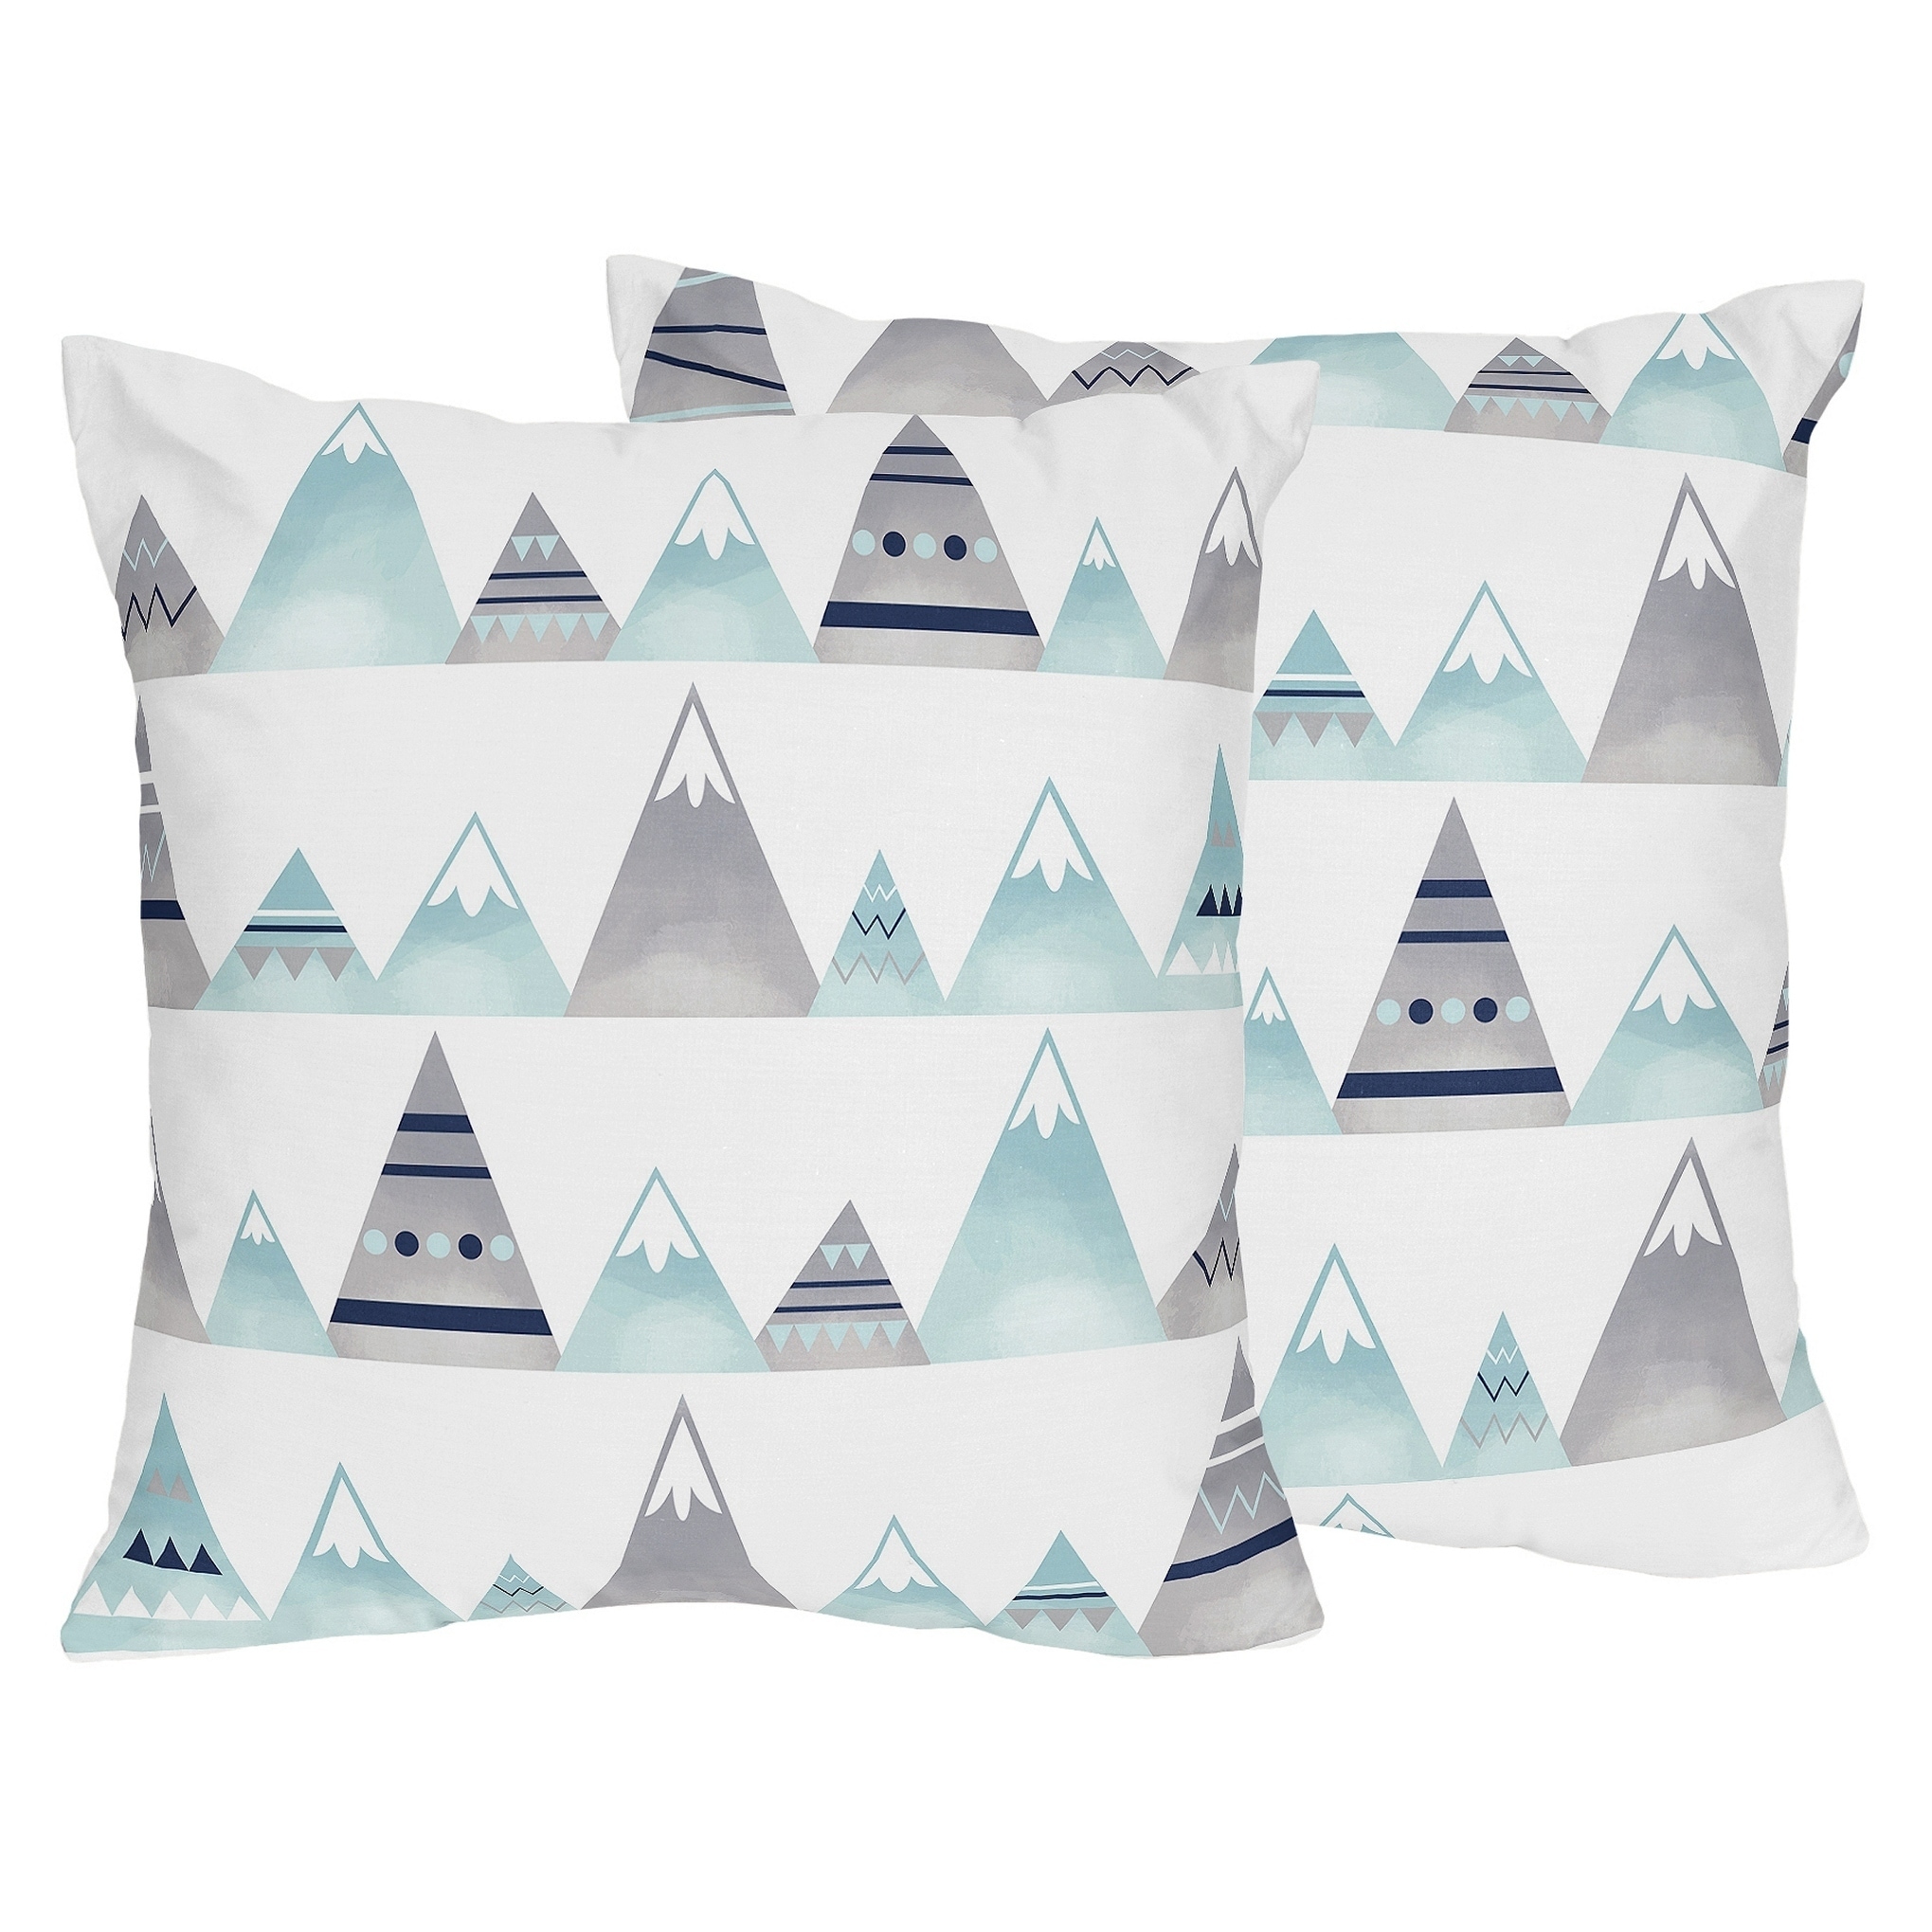 https://ak1.ostkcdn.com/images/products/18965795/Sweet-Jojo-Designs-Navy-Blue-Aqua-and-Grey-Aztec-Mountain-Collection-18-inch-Decorative-Accent-Throw-Pillows-Set-of-2-df844895-76c5-475d-afd0-2431a2a066fe.jpg